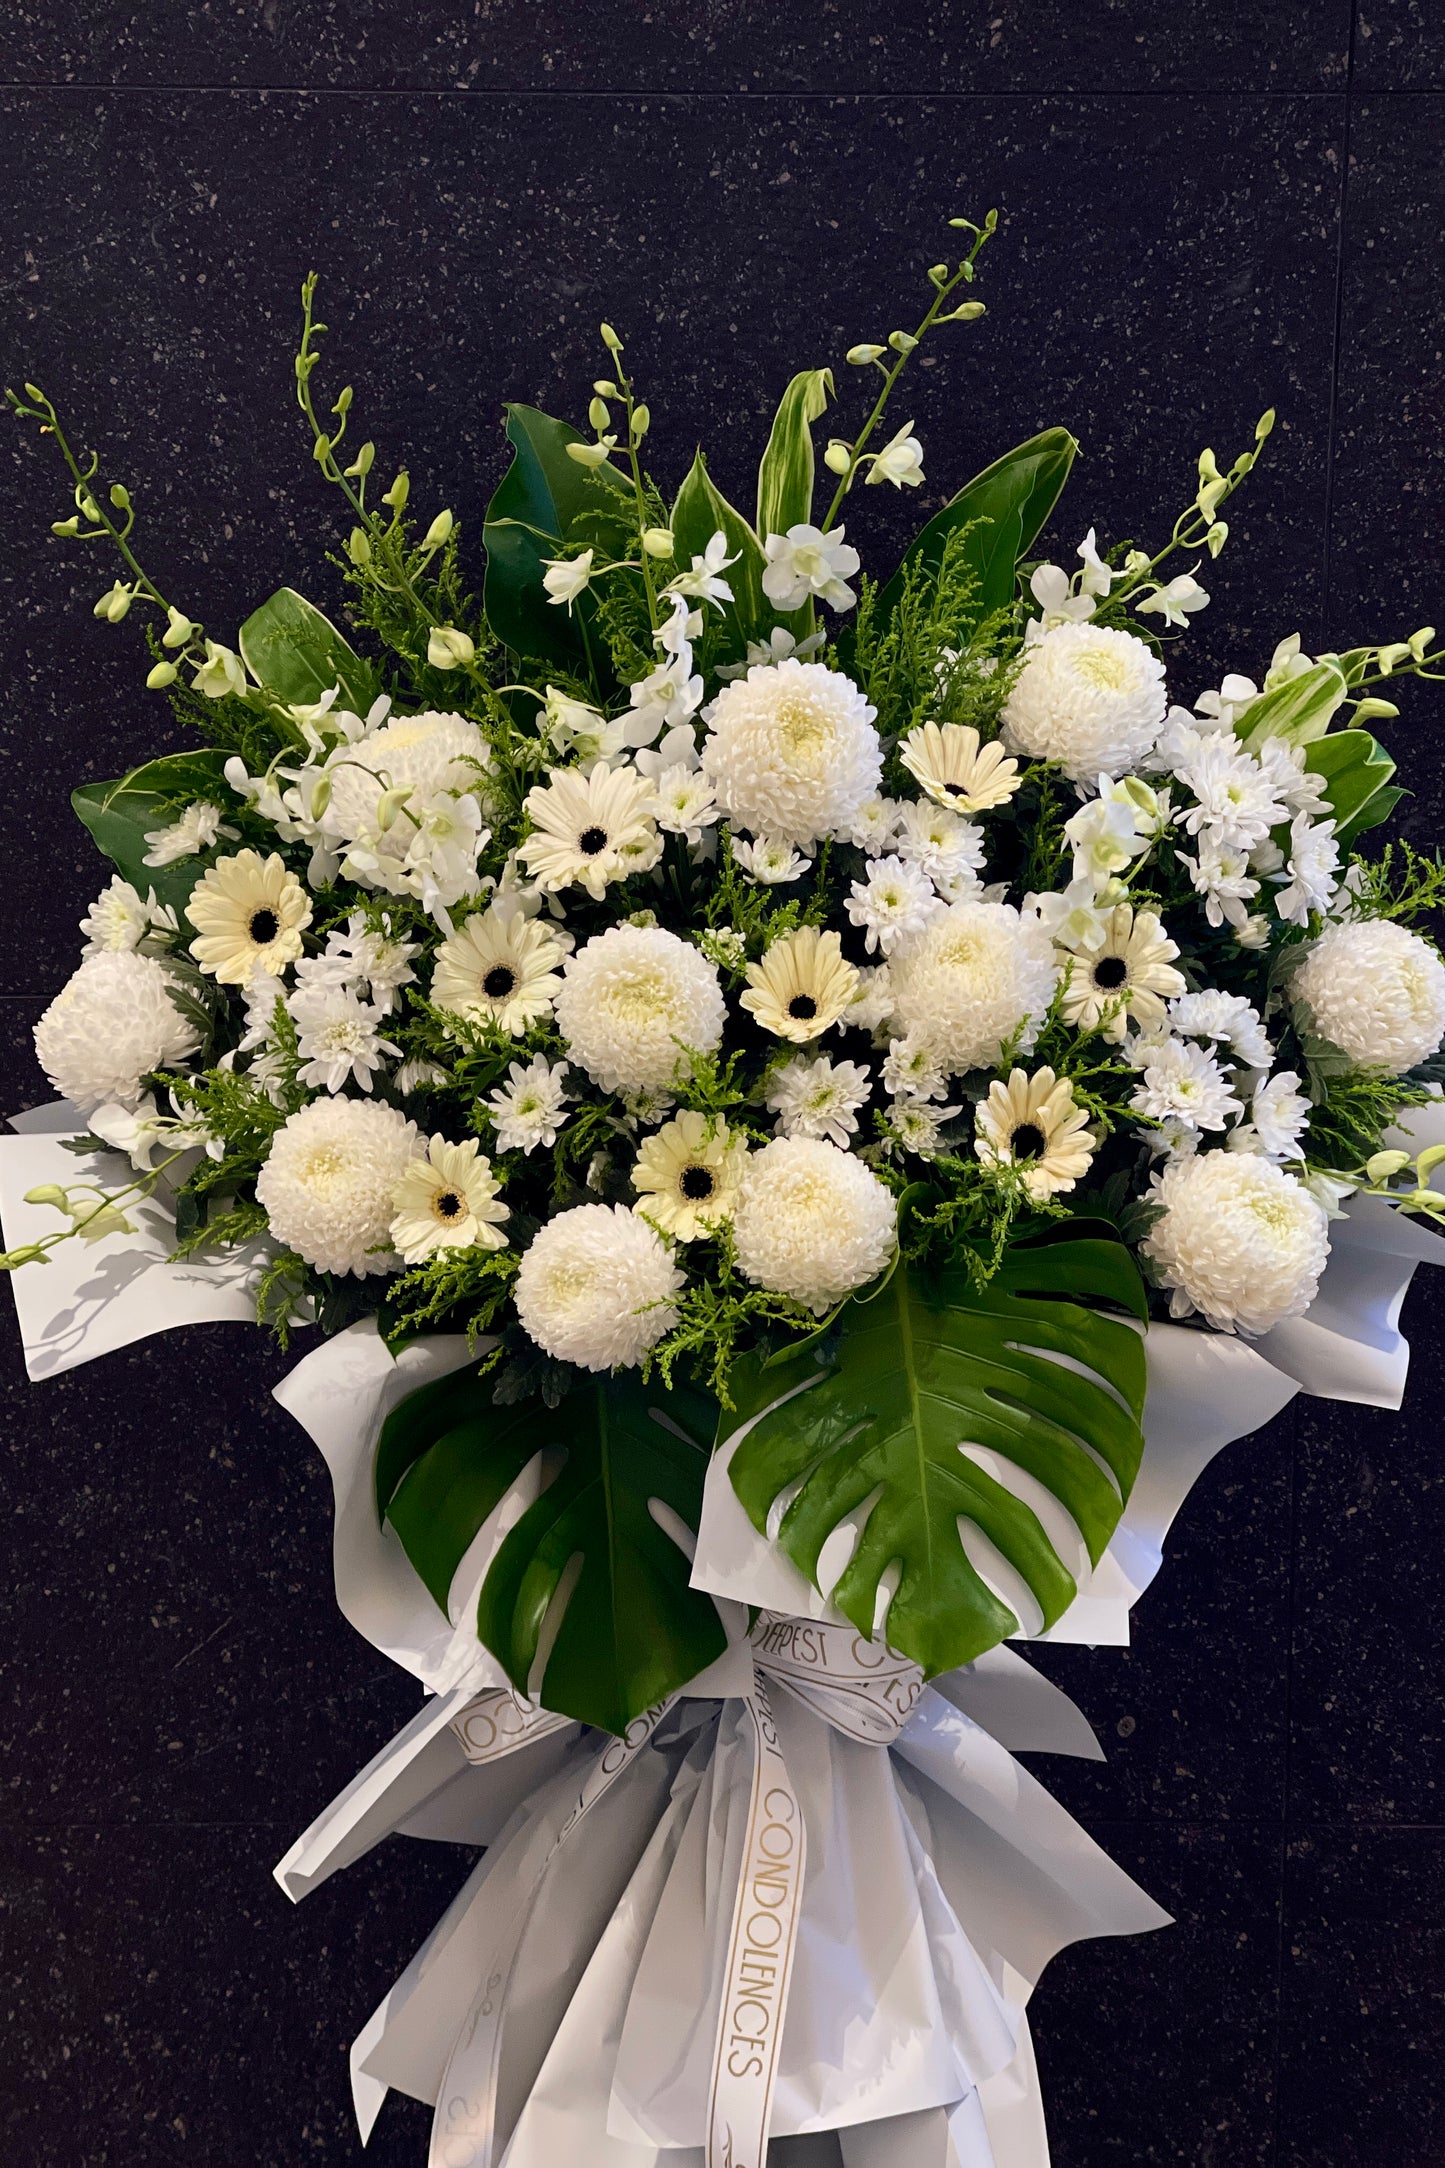 CSTS 3805 | Condolences and Funeral Flowers